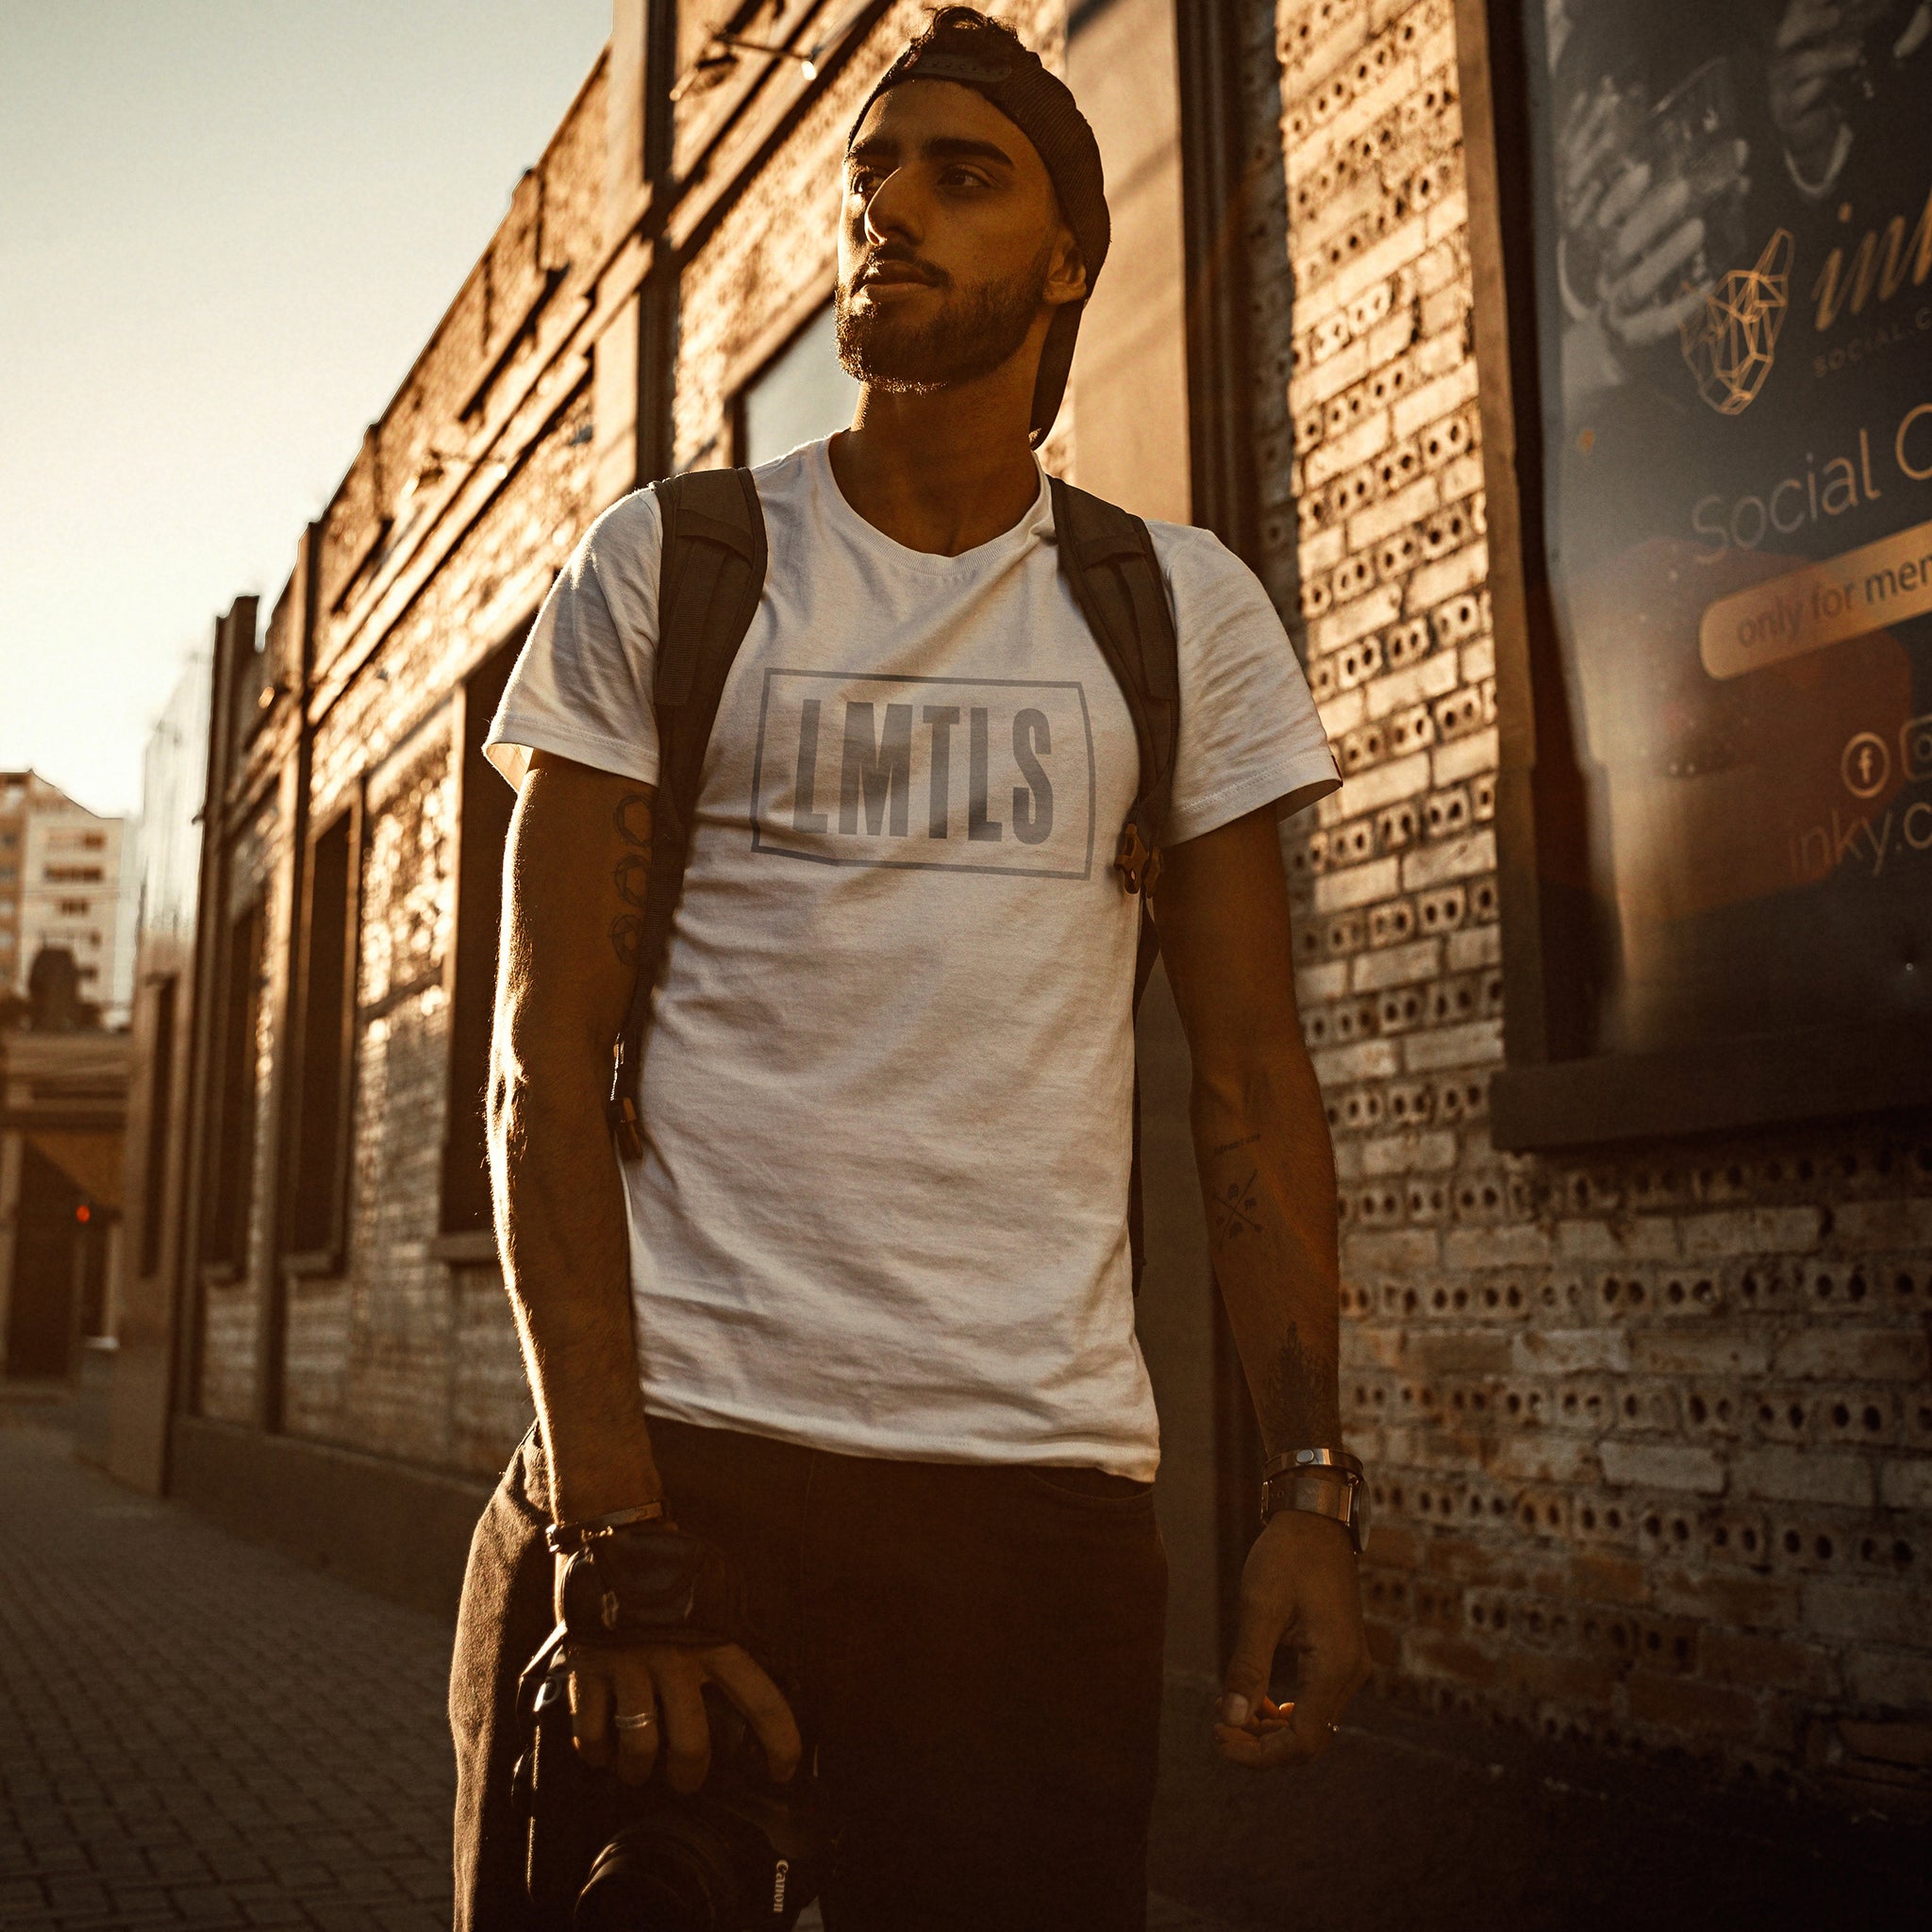 A young man with his camera, wearing an inspirational, motivational graphic t-shirt in White, with the typographic treatment LMTLS, representing a “limitless” lifestyle. On the back of the shirt is the number 10, as in a 10 out of 10, perfect score. By fashion brand YUF, from wolfsaint.net